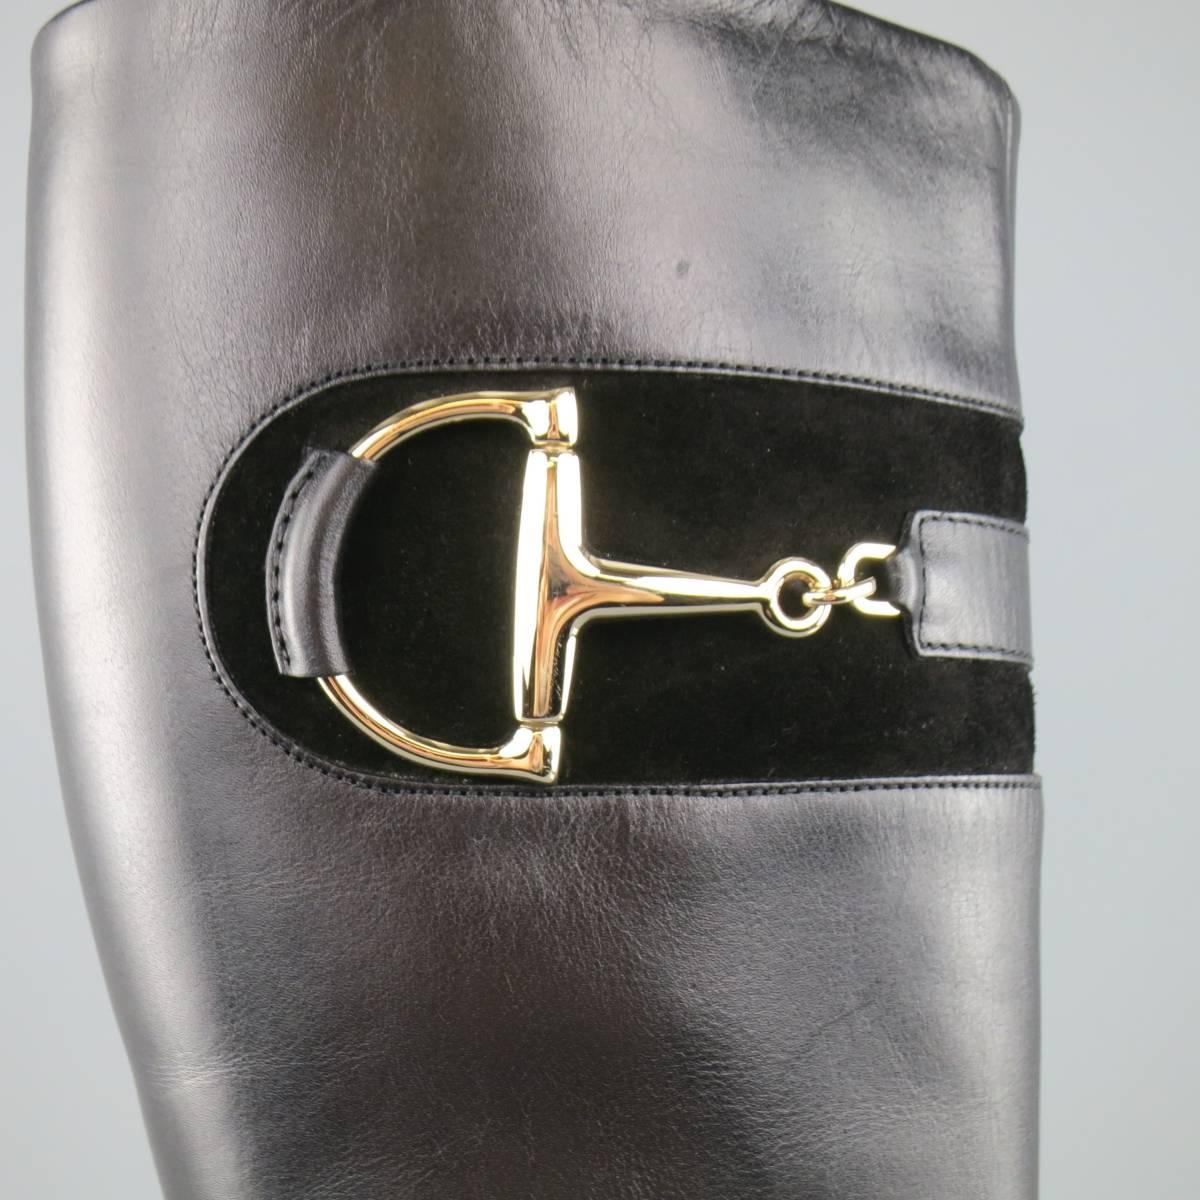 GUCCI vintage inspired knee high boots come in smooth black leather and feature a square toe, thick stacked heel, internal side zip, and suede detail with light gold tone  horsebit hardware. With Box. Made in Italy.
 
Excellent Pre-Owned